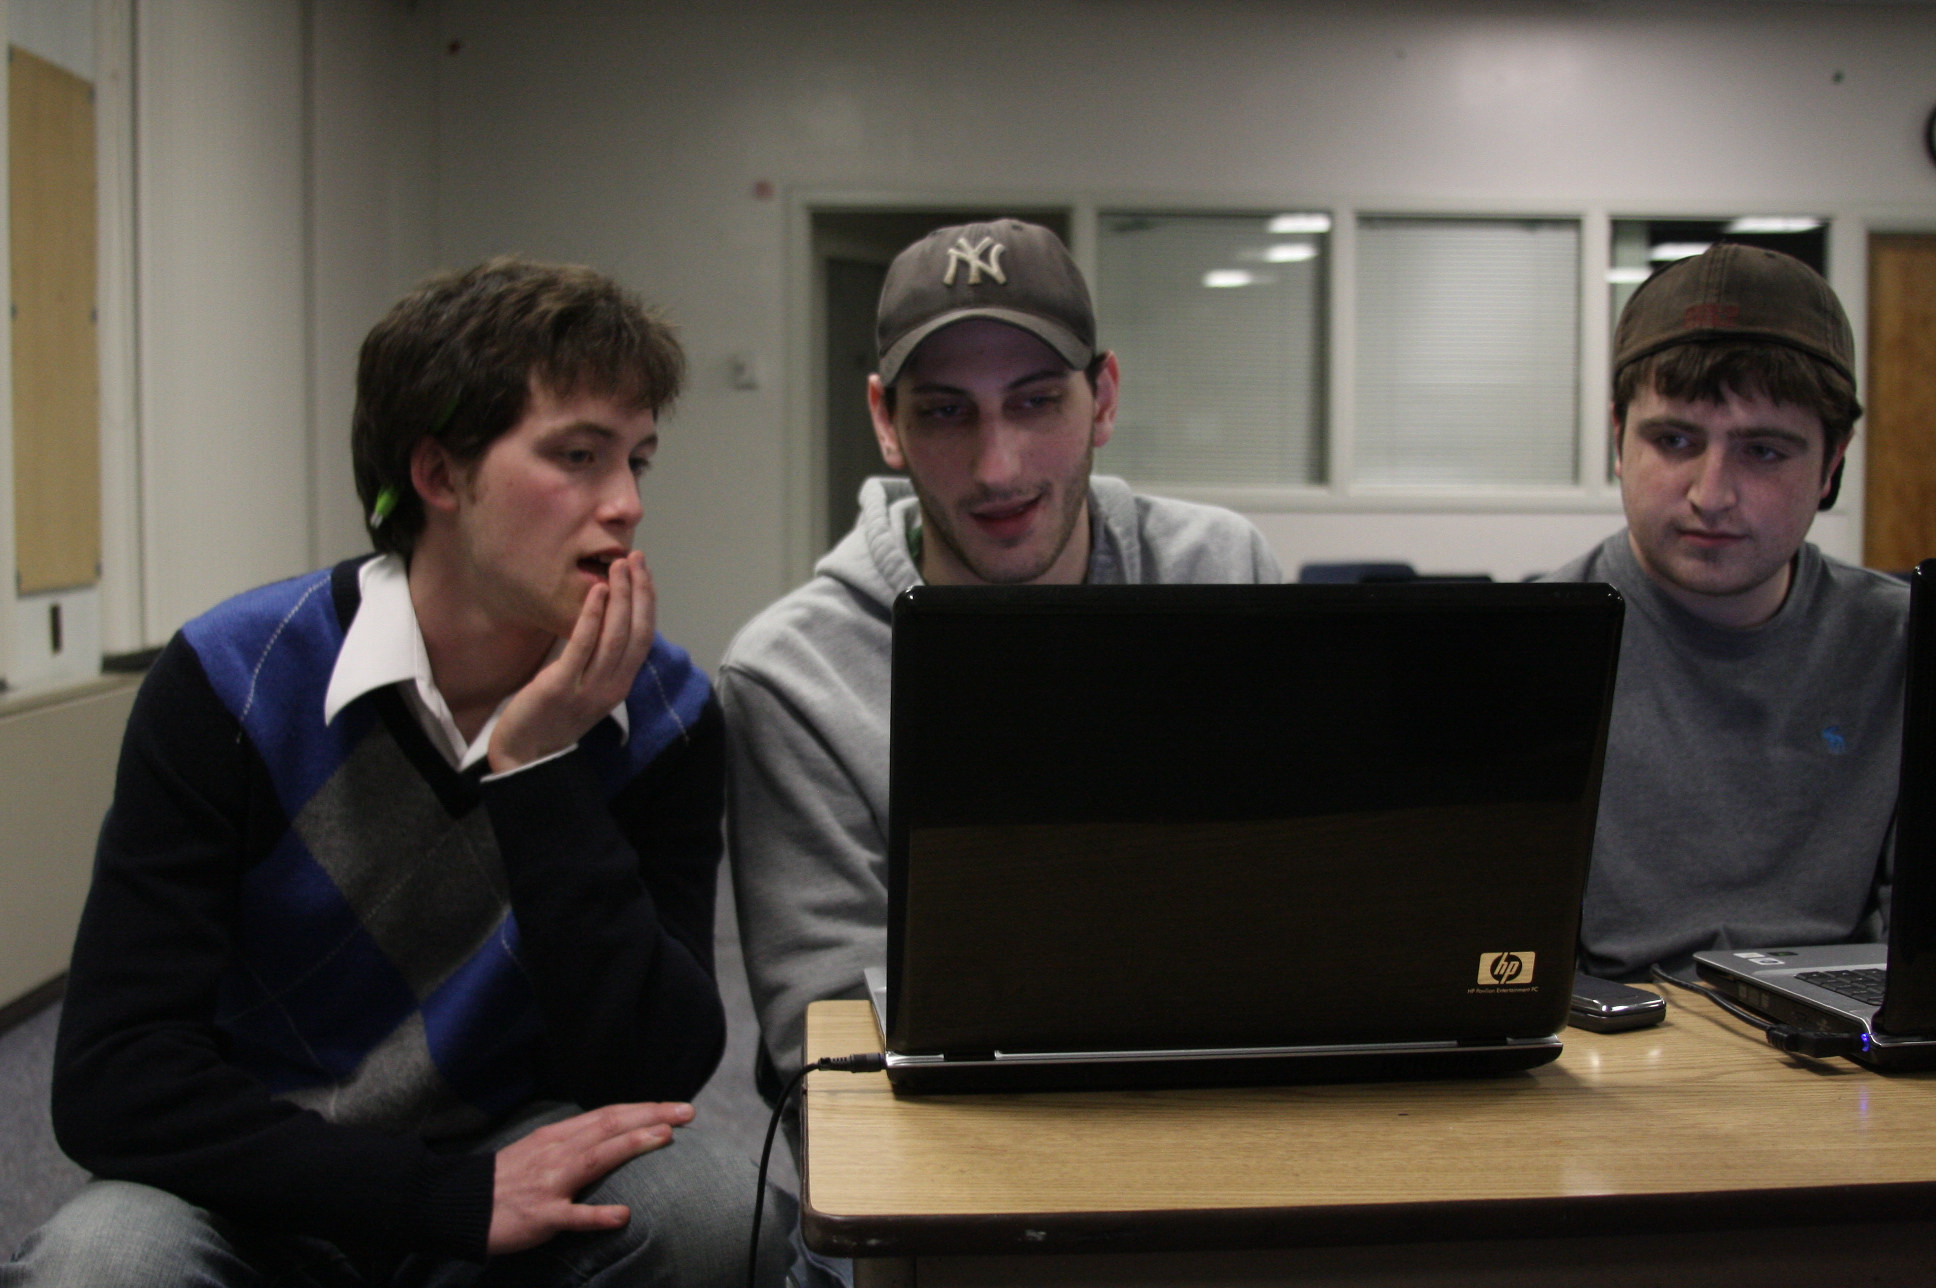 two boys in a room looking at a laptop